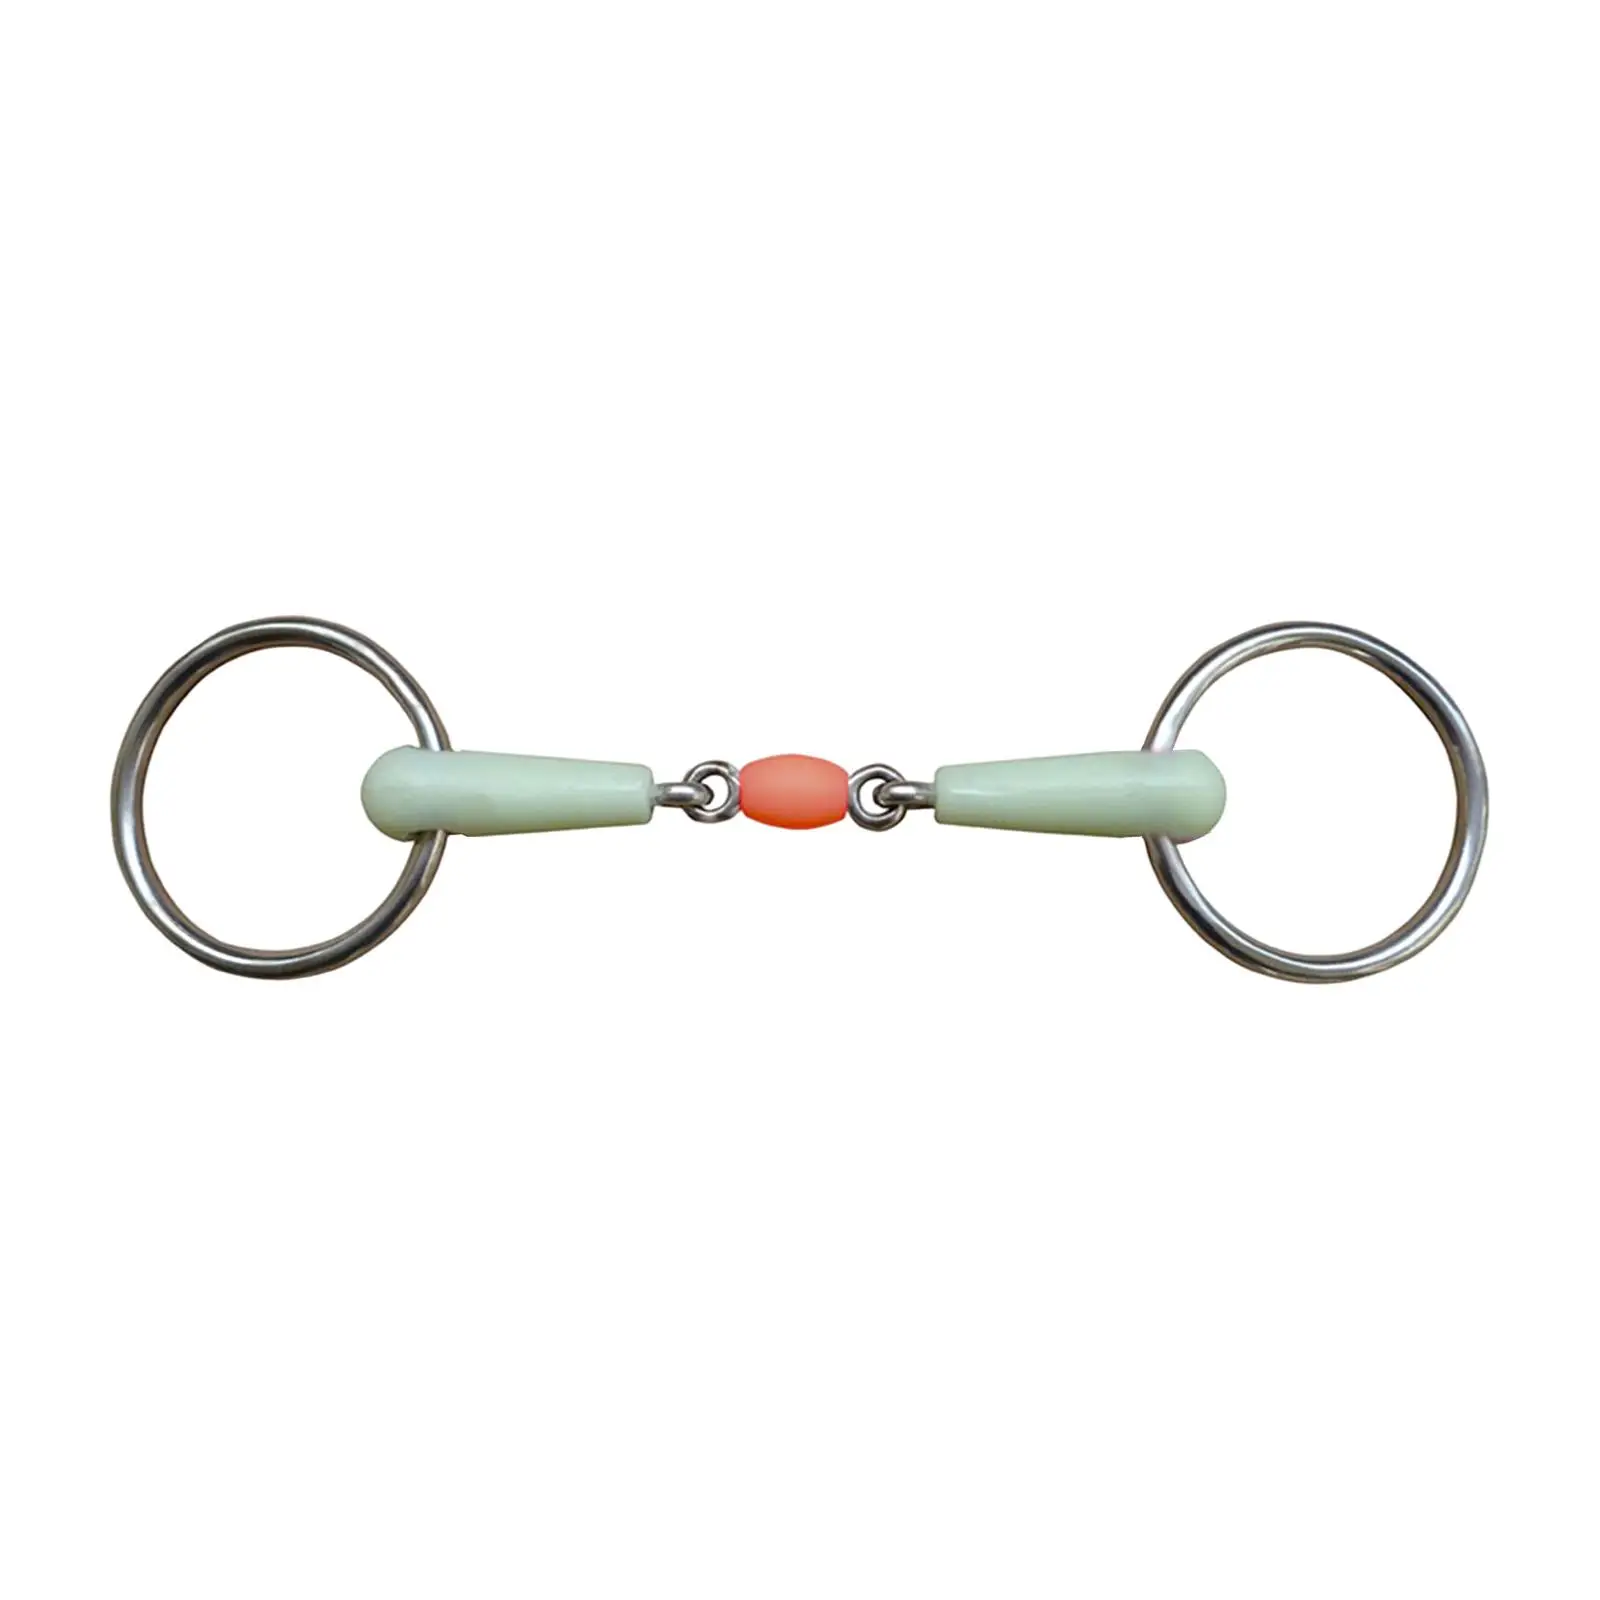 Horse Mouth Bit Stainless Steel Snaffle Bits Cheek for Training Equipment